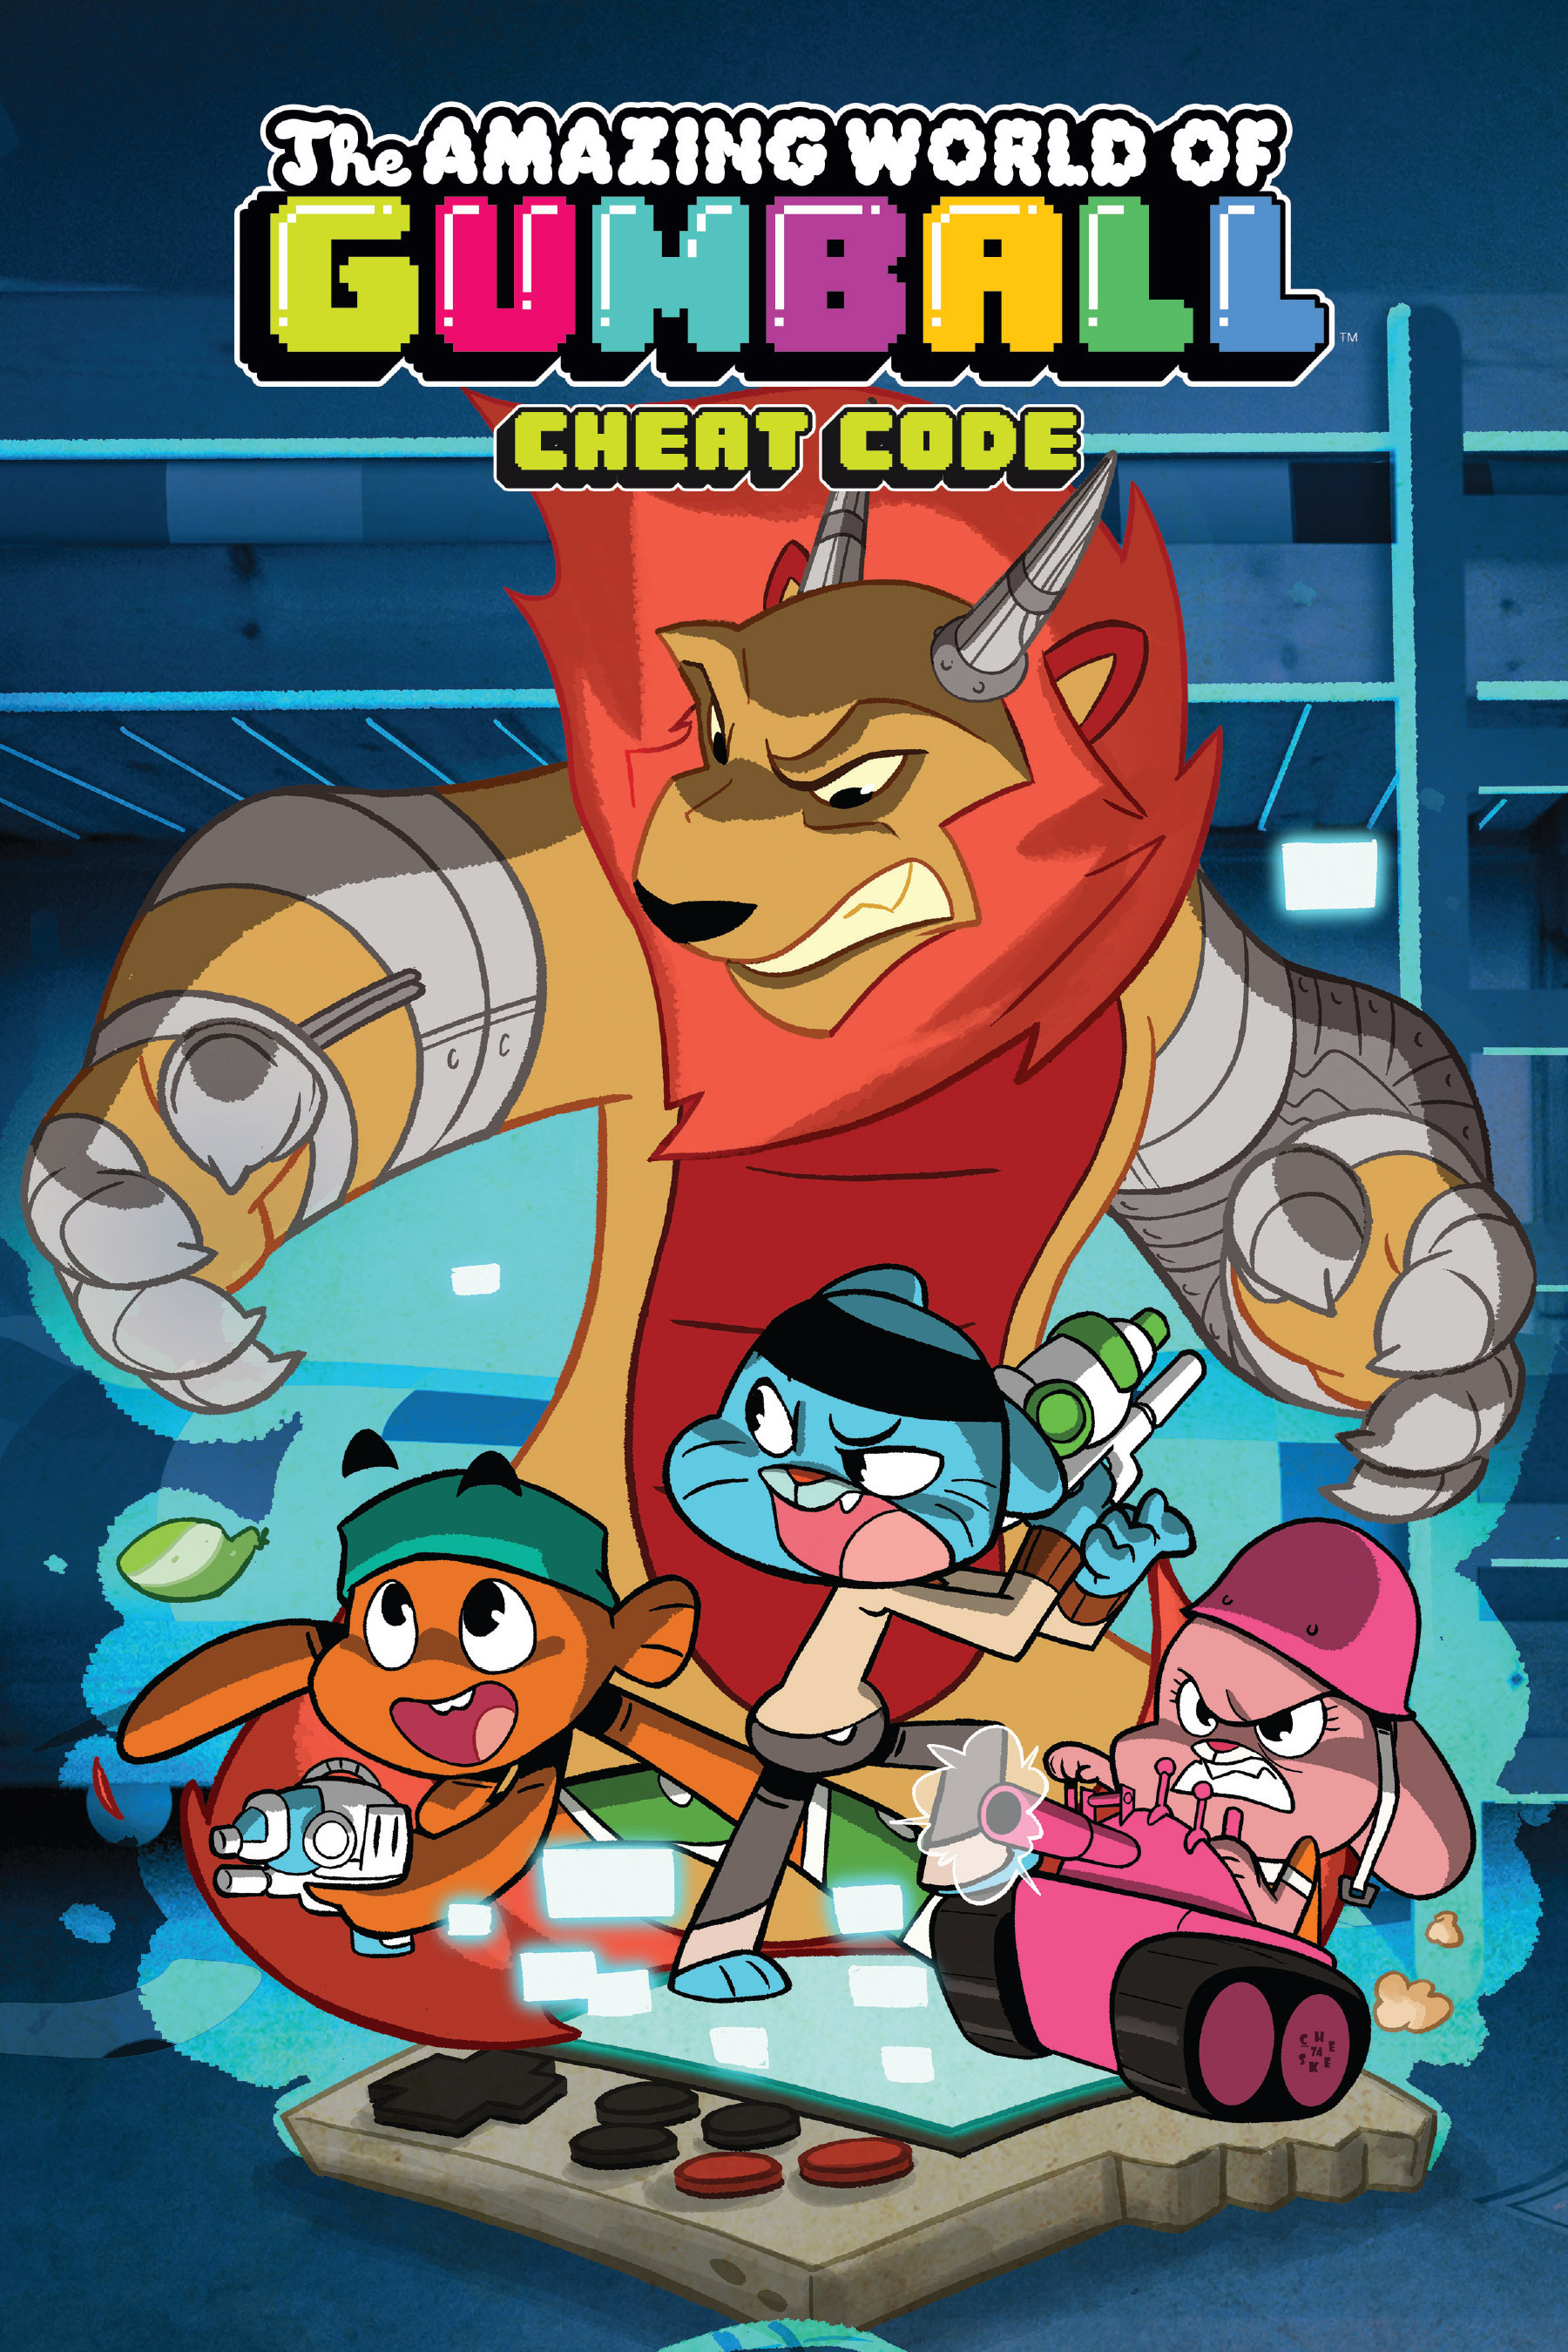 Read online The Amazing World of Gumball: Cheat Code comic -  Issue # Full - 1